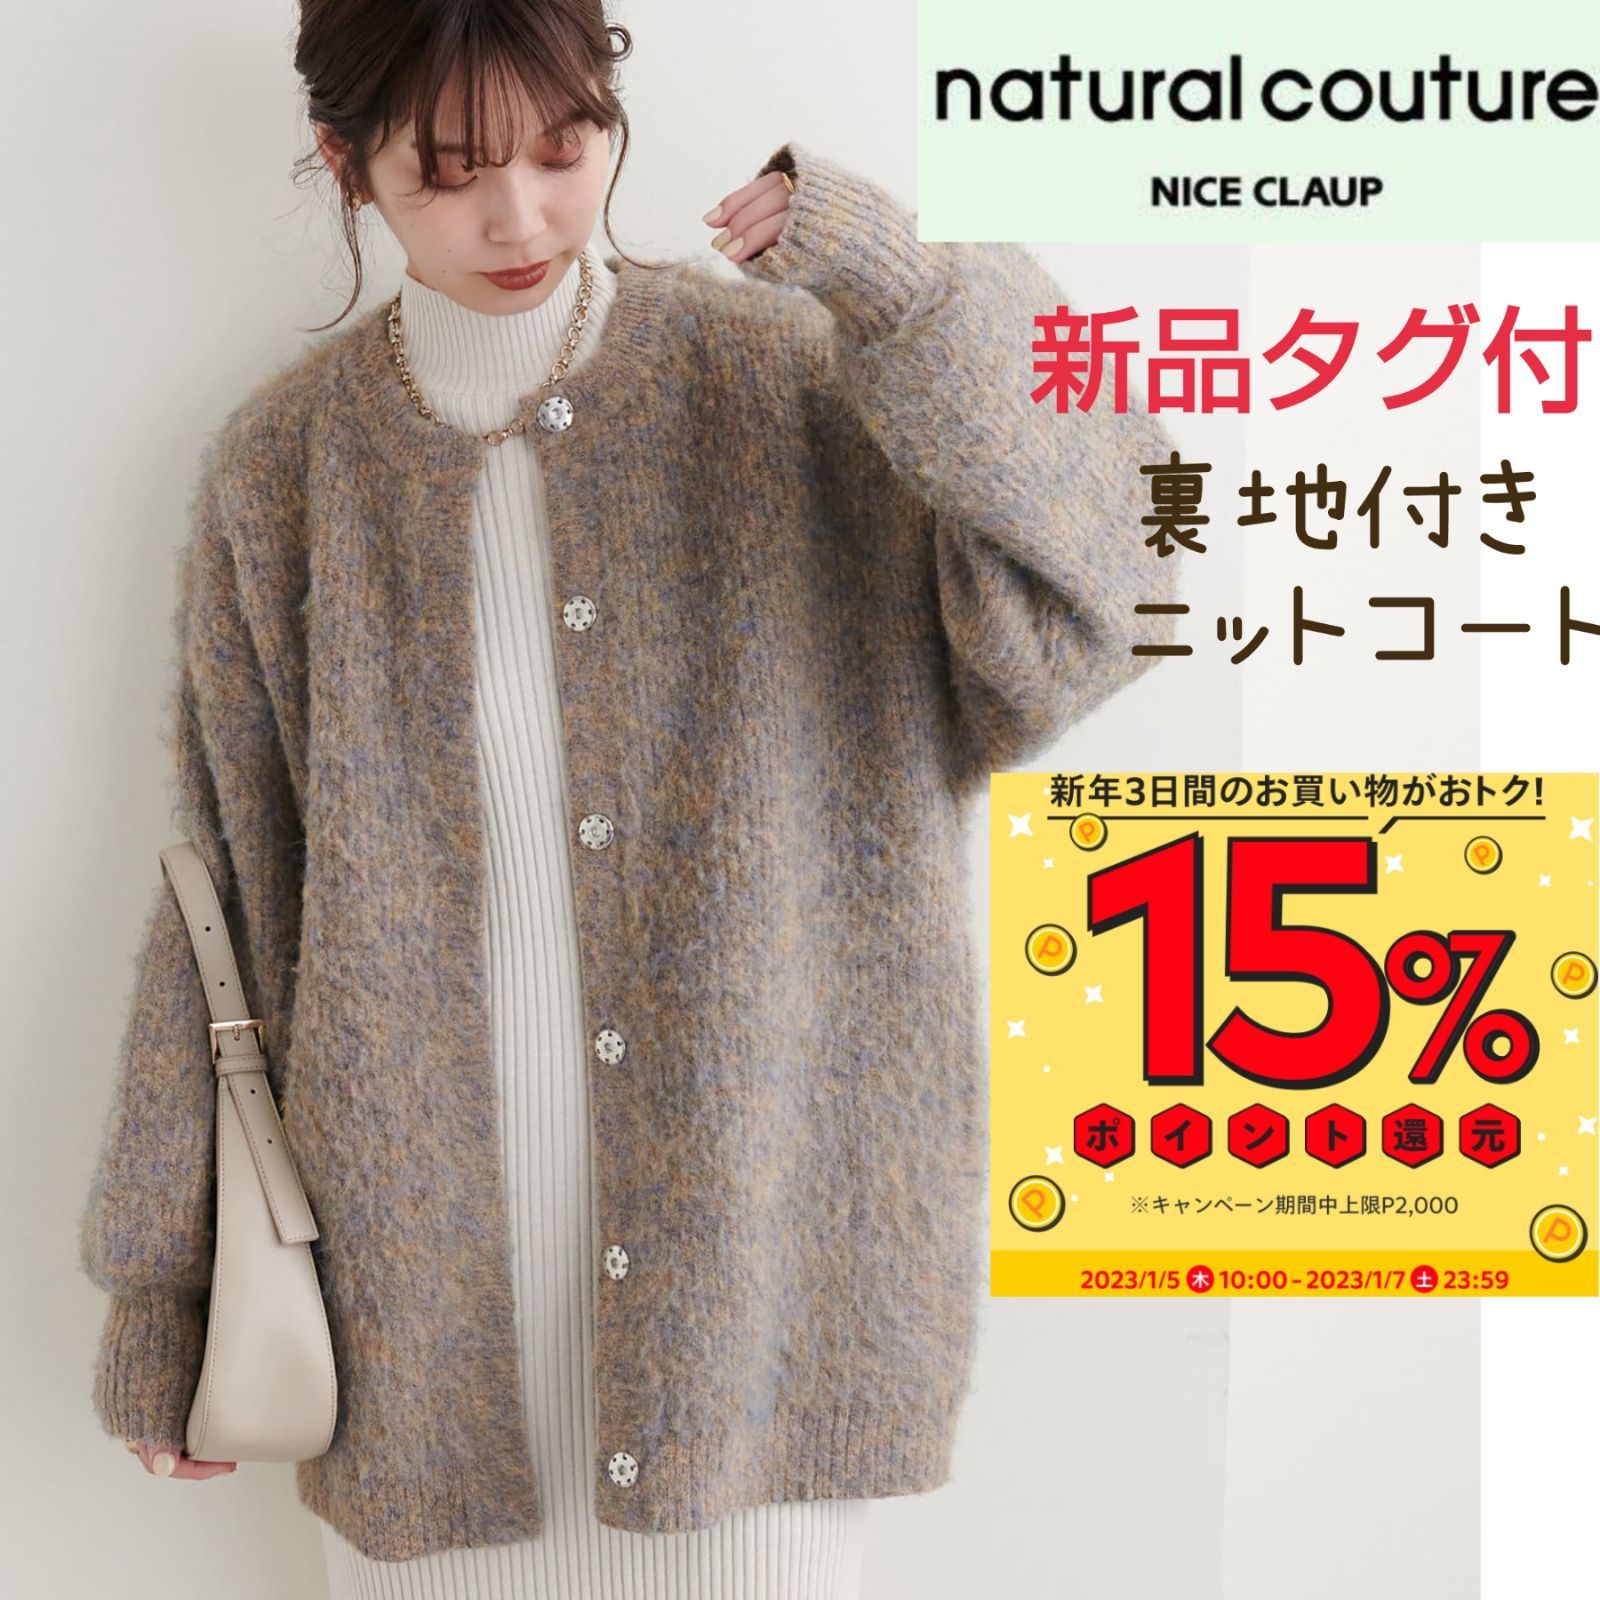 natural couture◆カラーメランジ裏付きニットコート